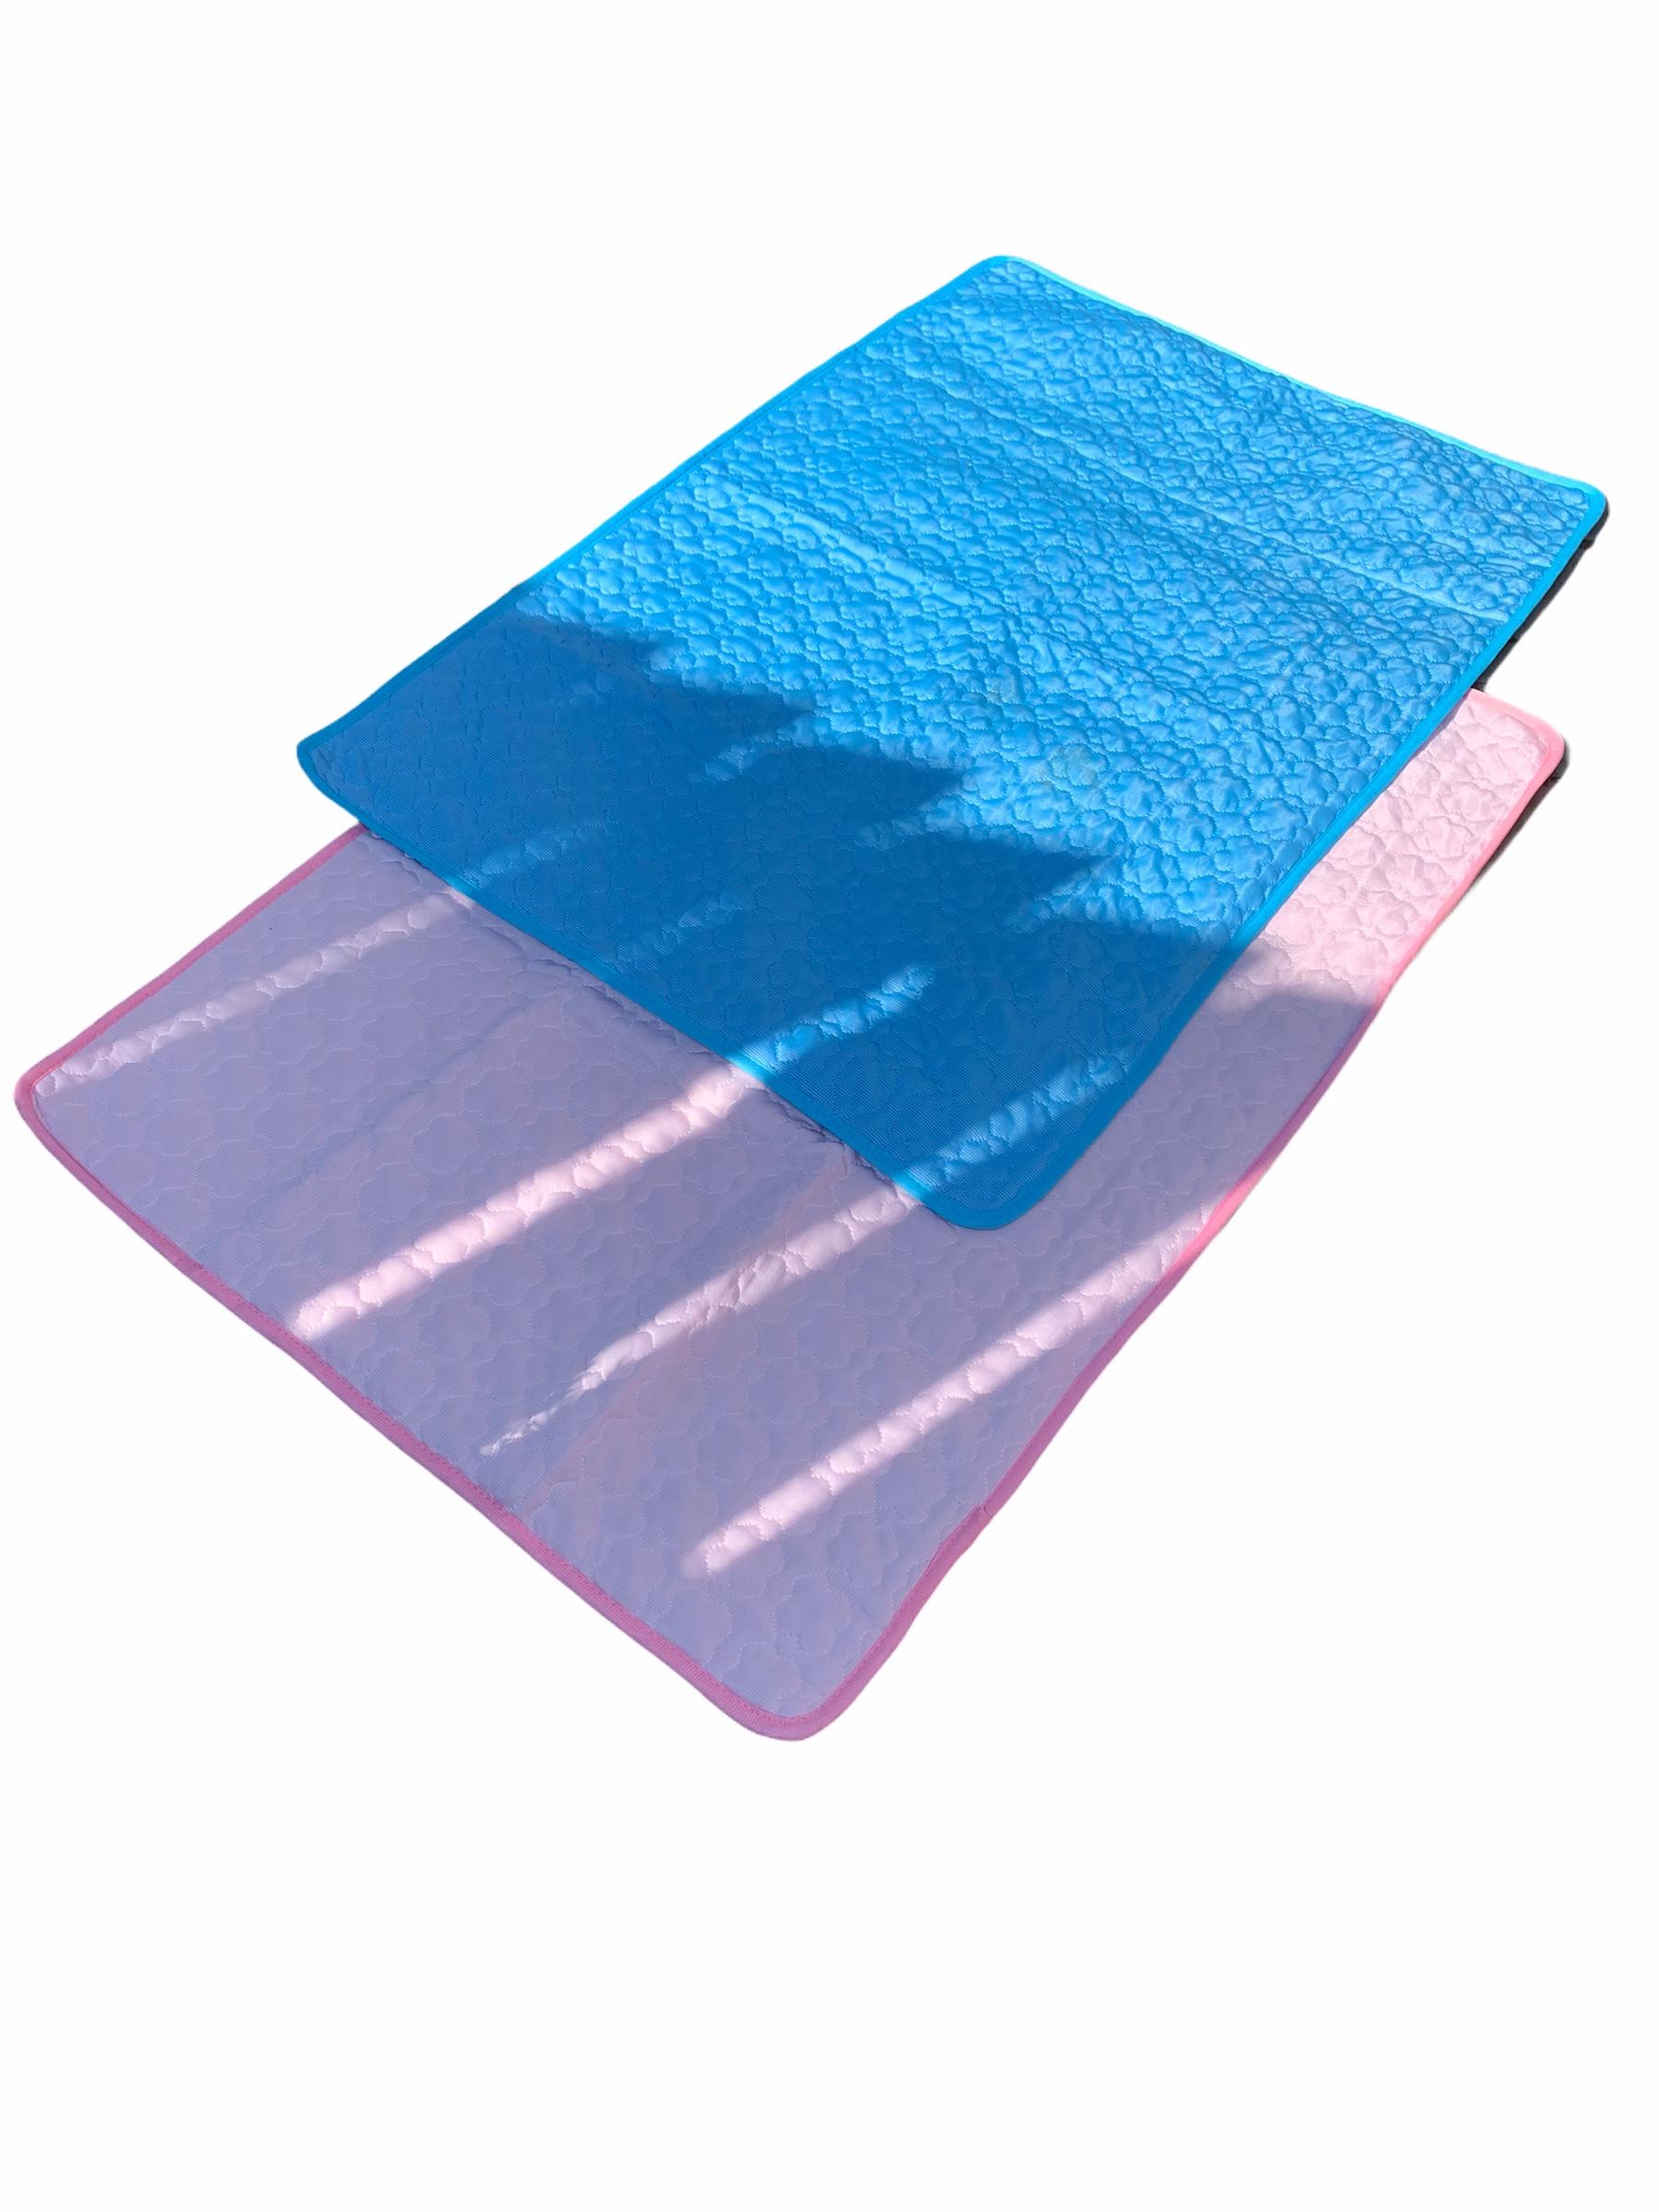 Pink and blue cooling mats